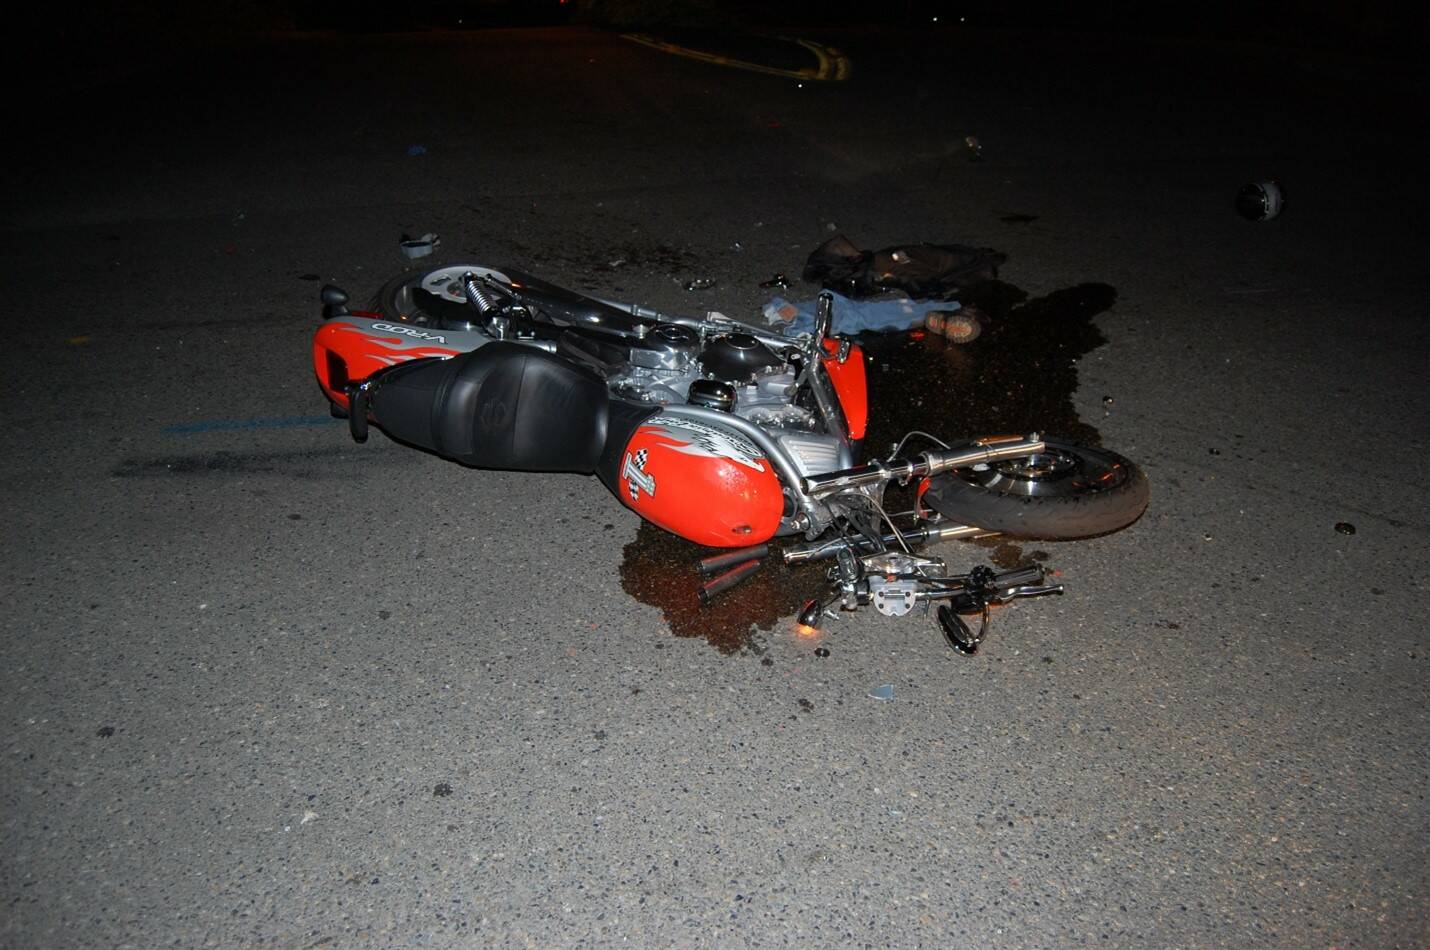 Daren Dougan’s motorcycle following an unsolved hit-and-run vehicular homicide in 2008. (Courtesy of the Renton Police Department)